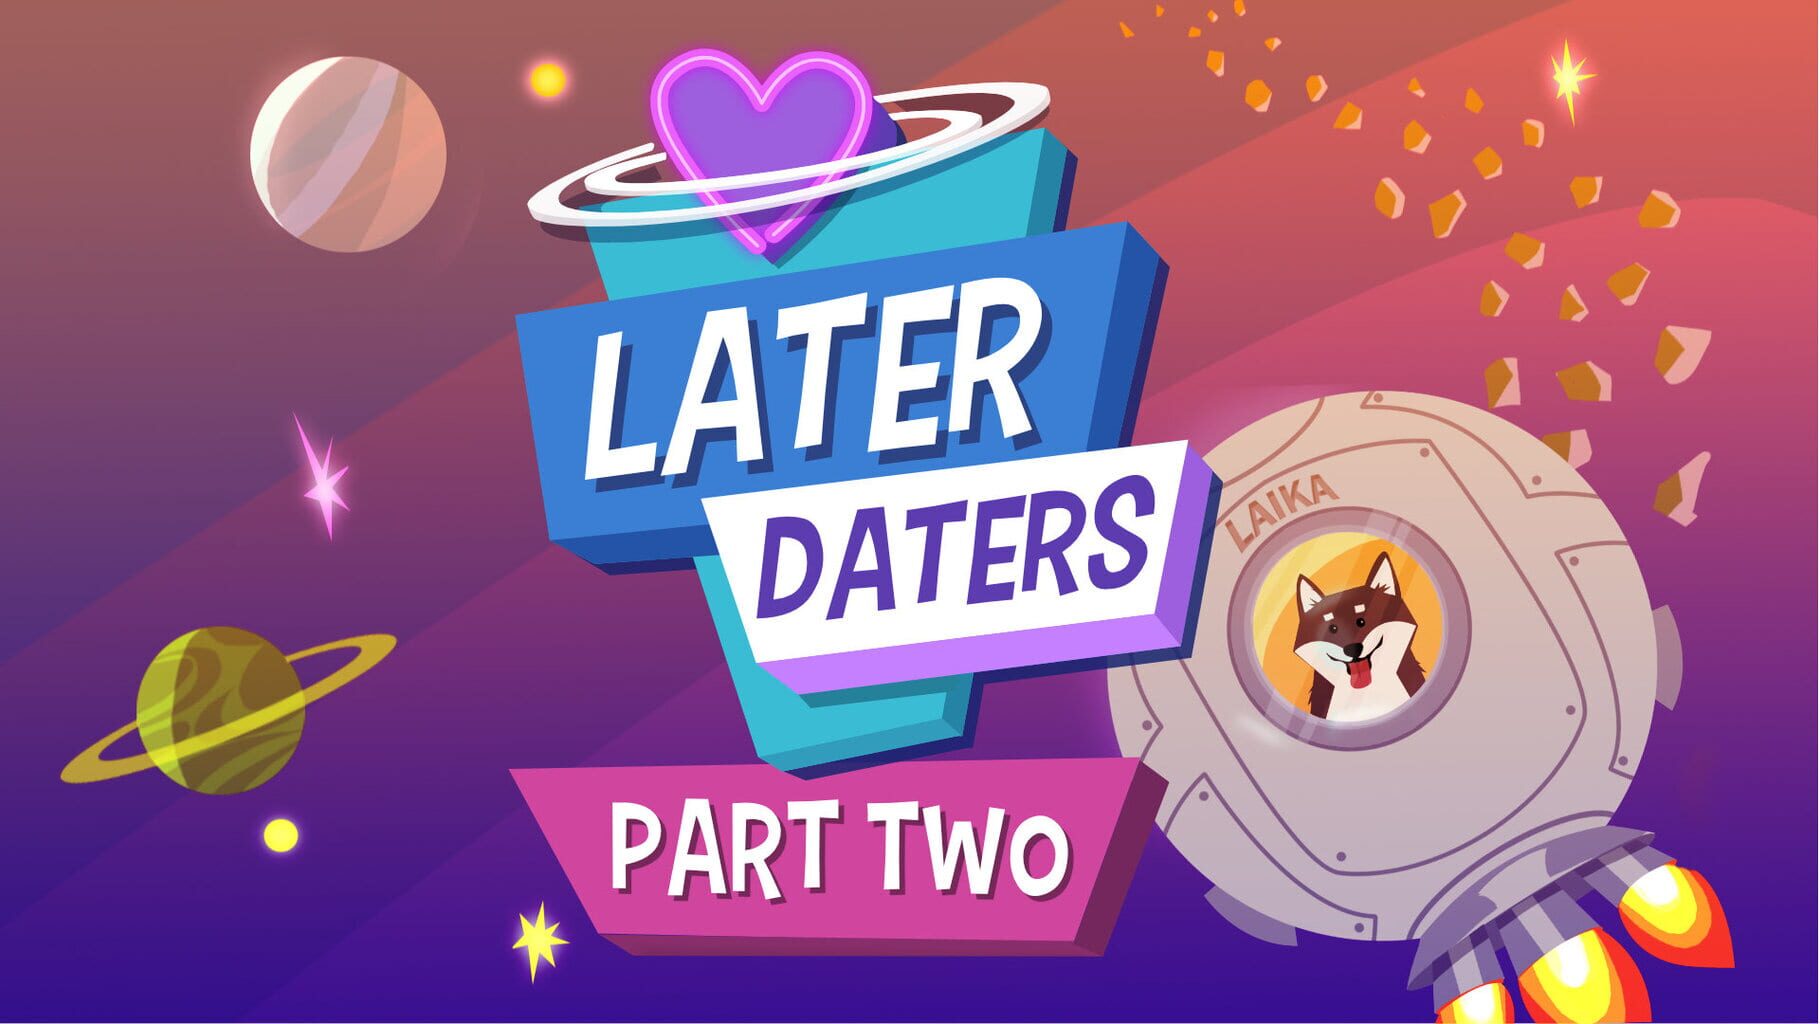 Later Daters: Part 2 artwork